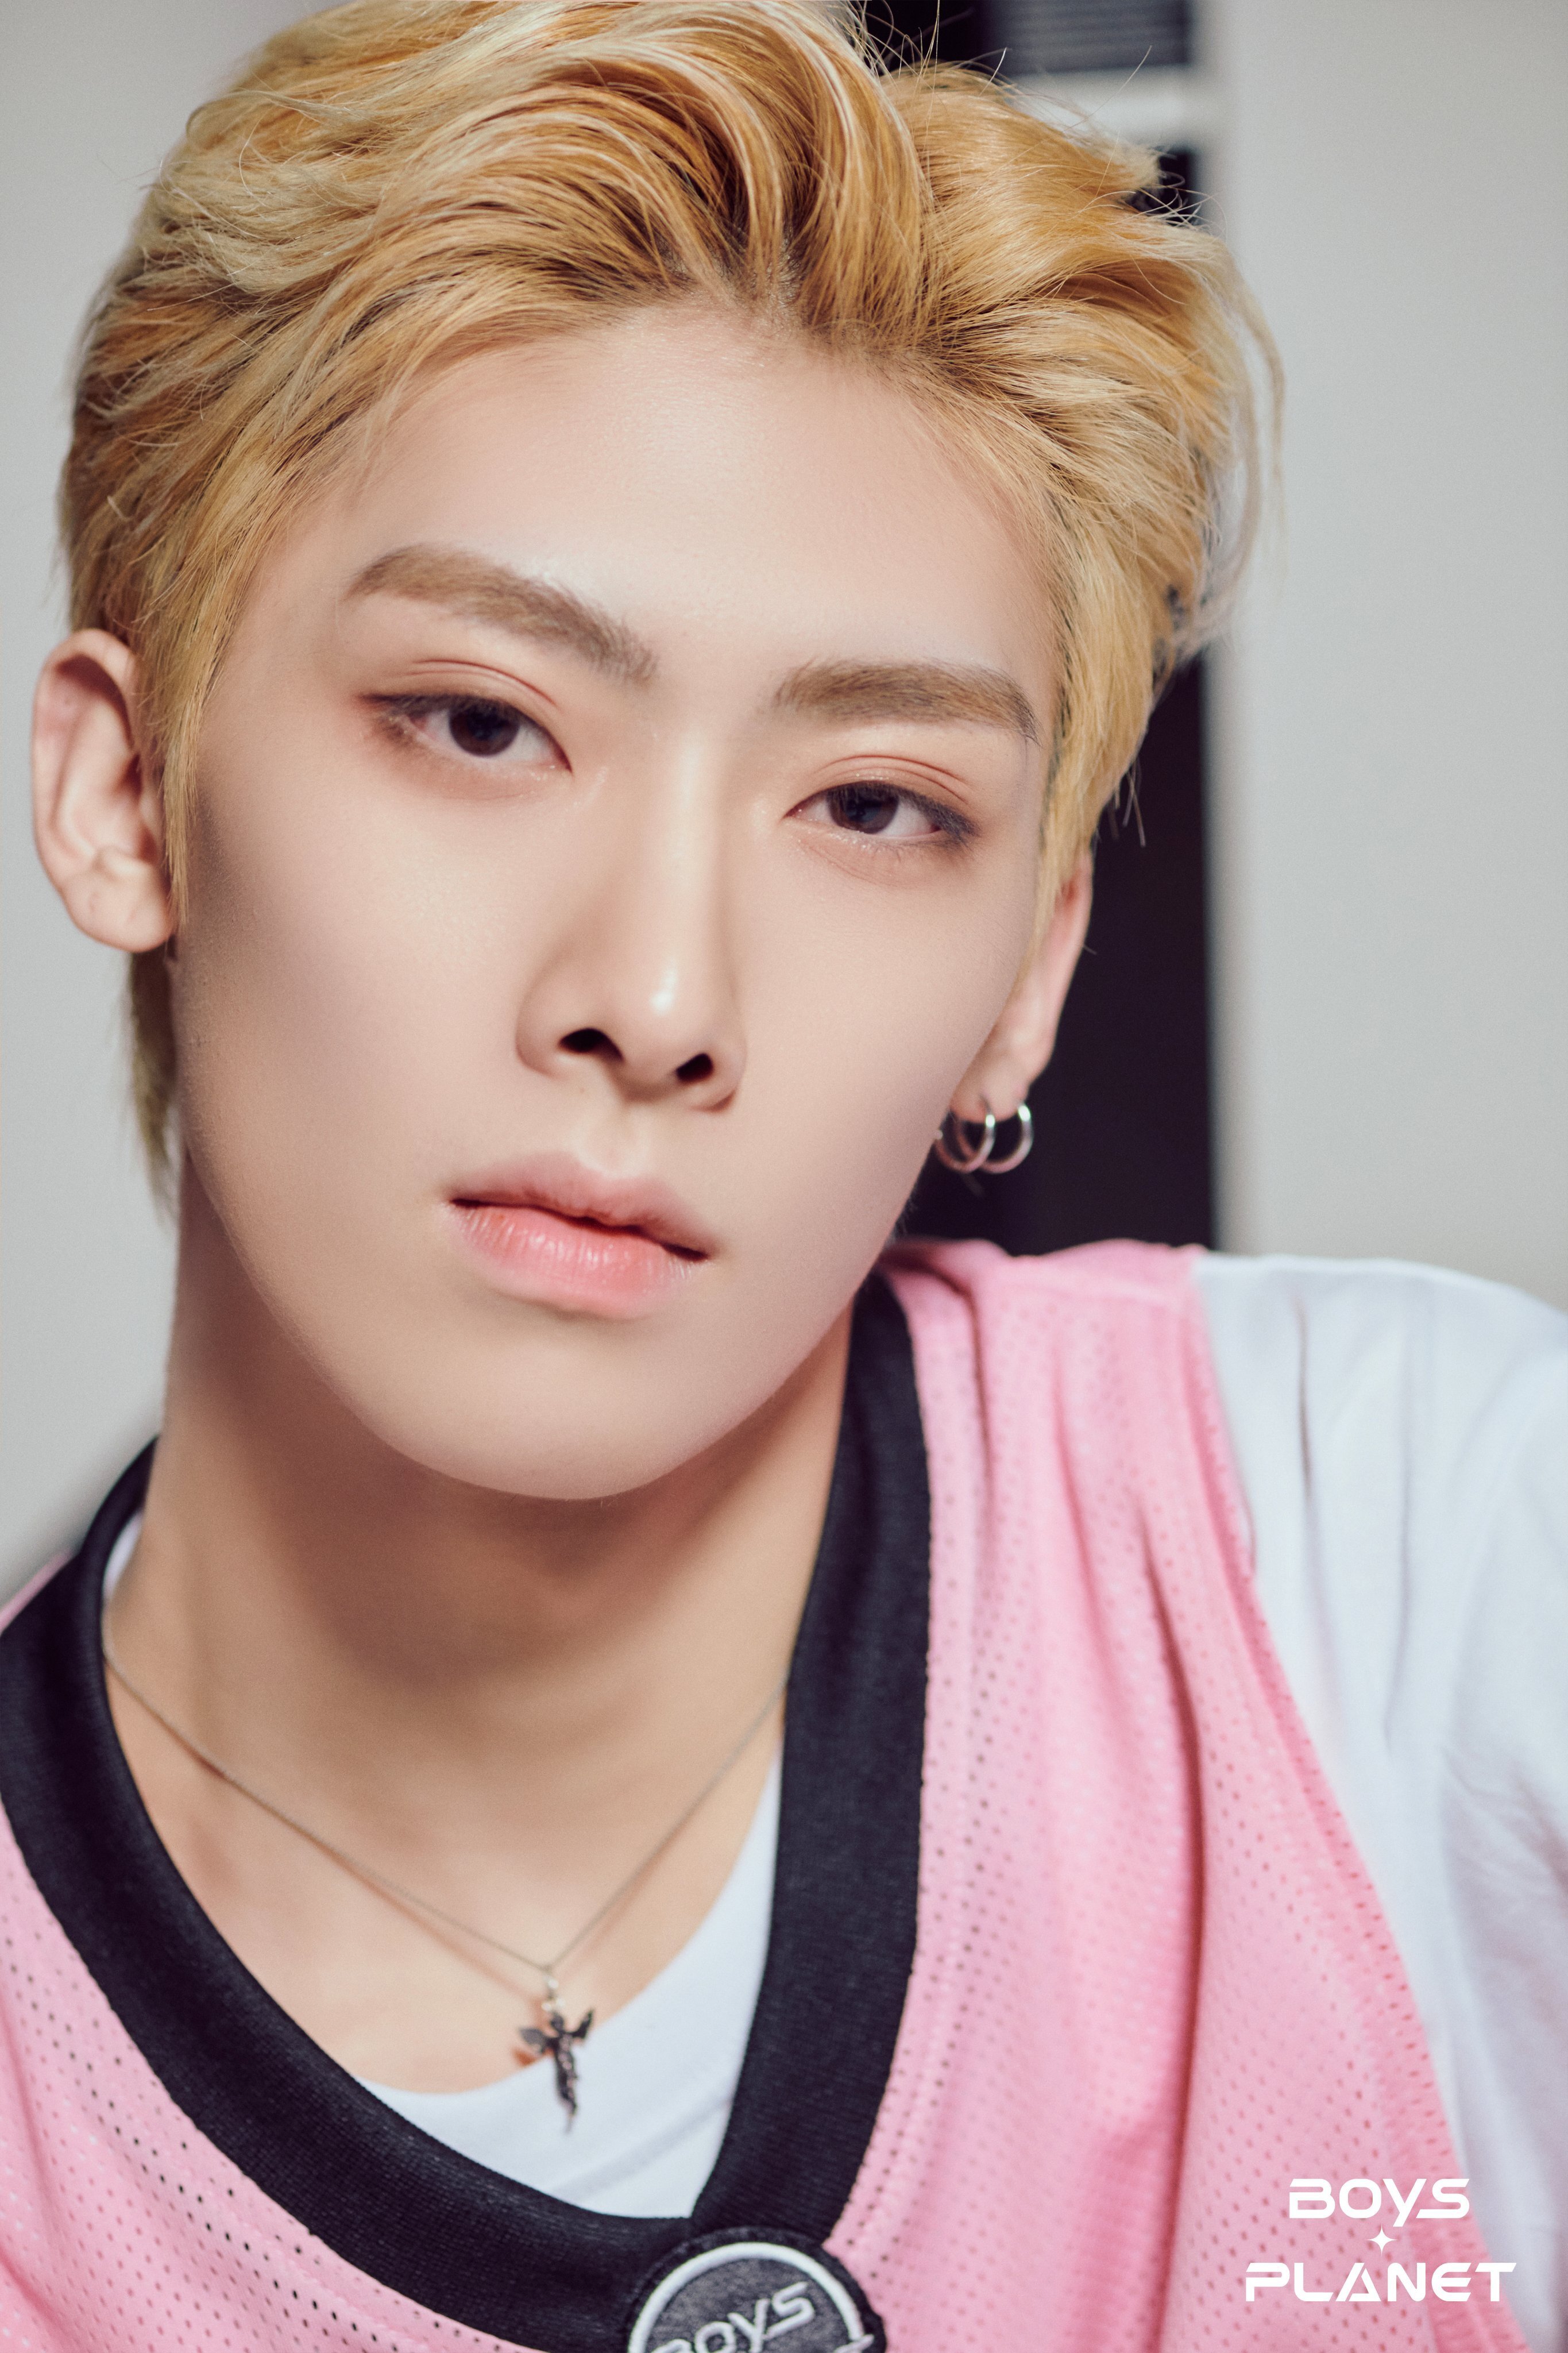 Boys Planet 2023 profile - G group - Ricky | kpopping